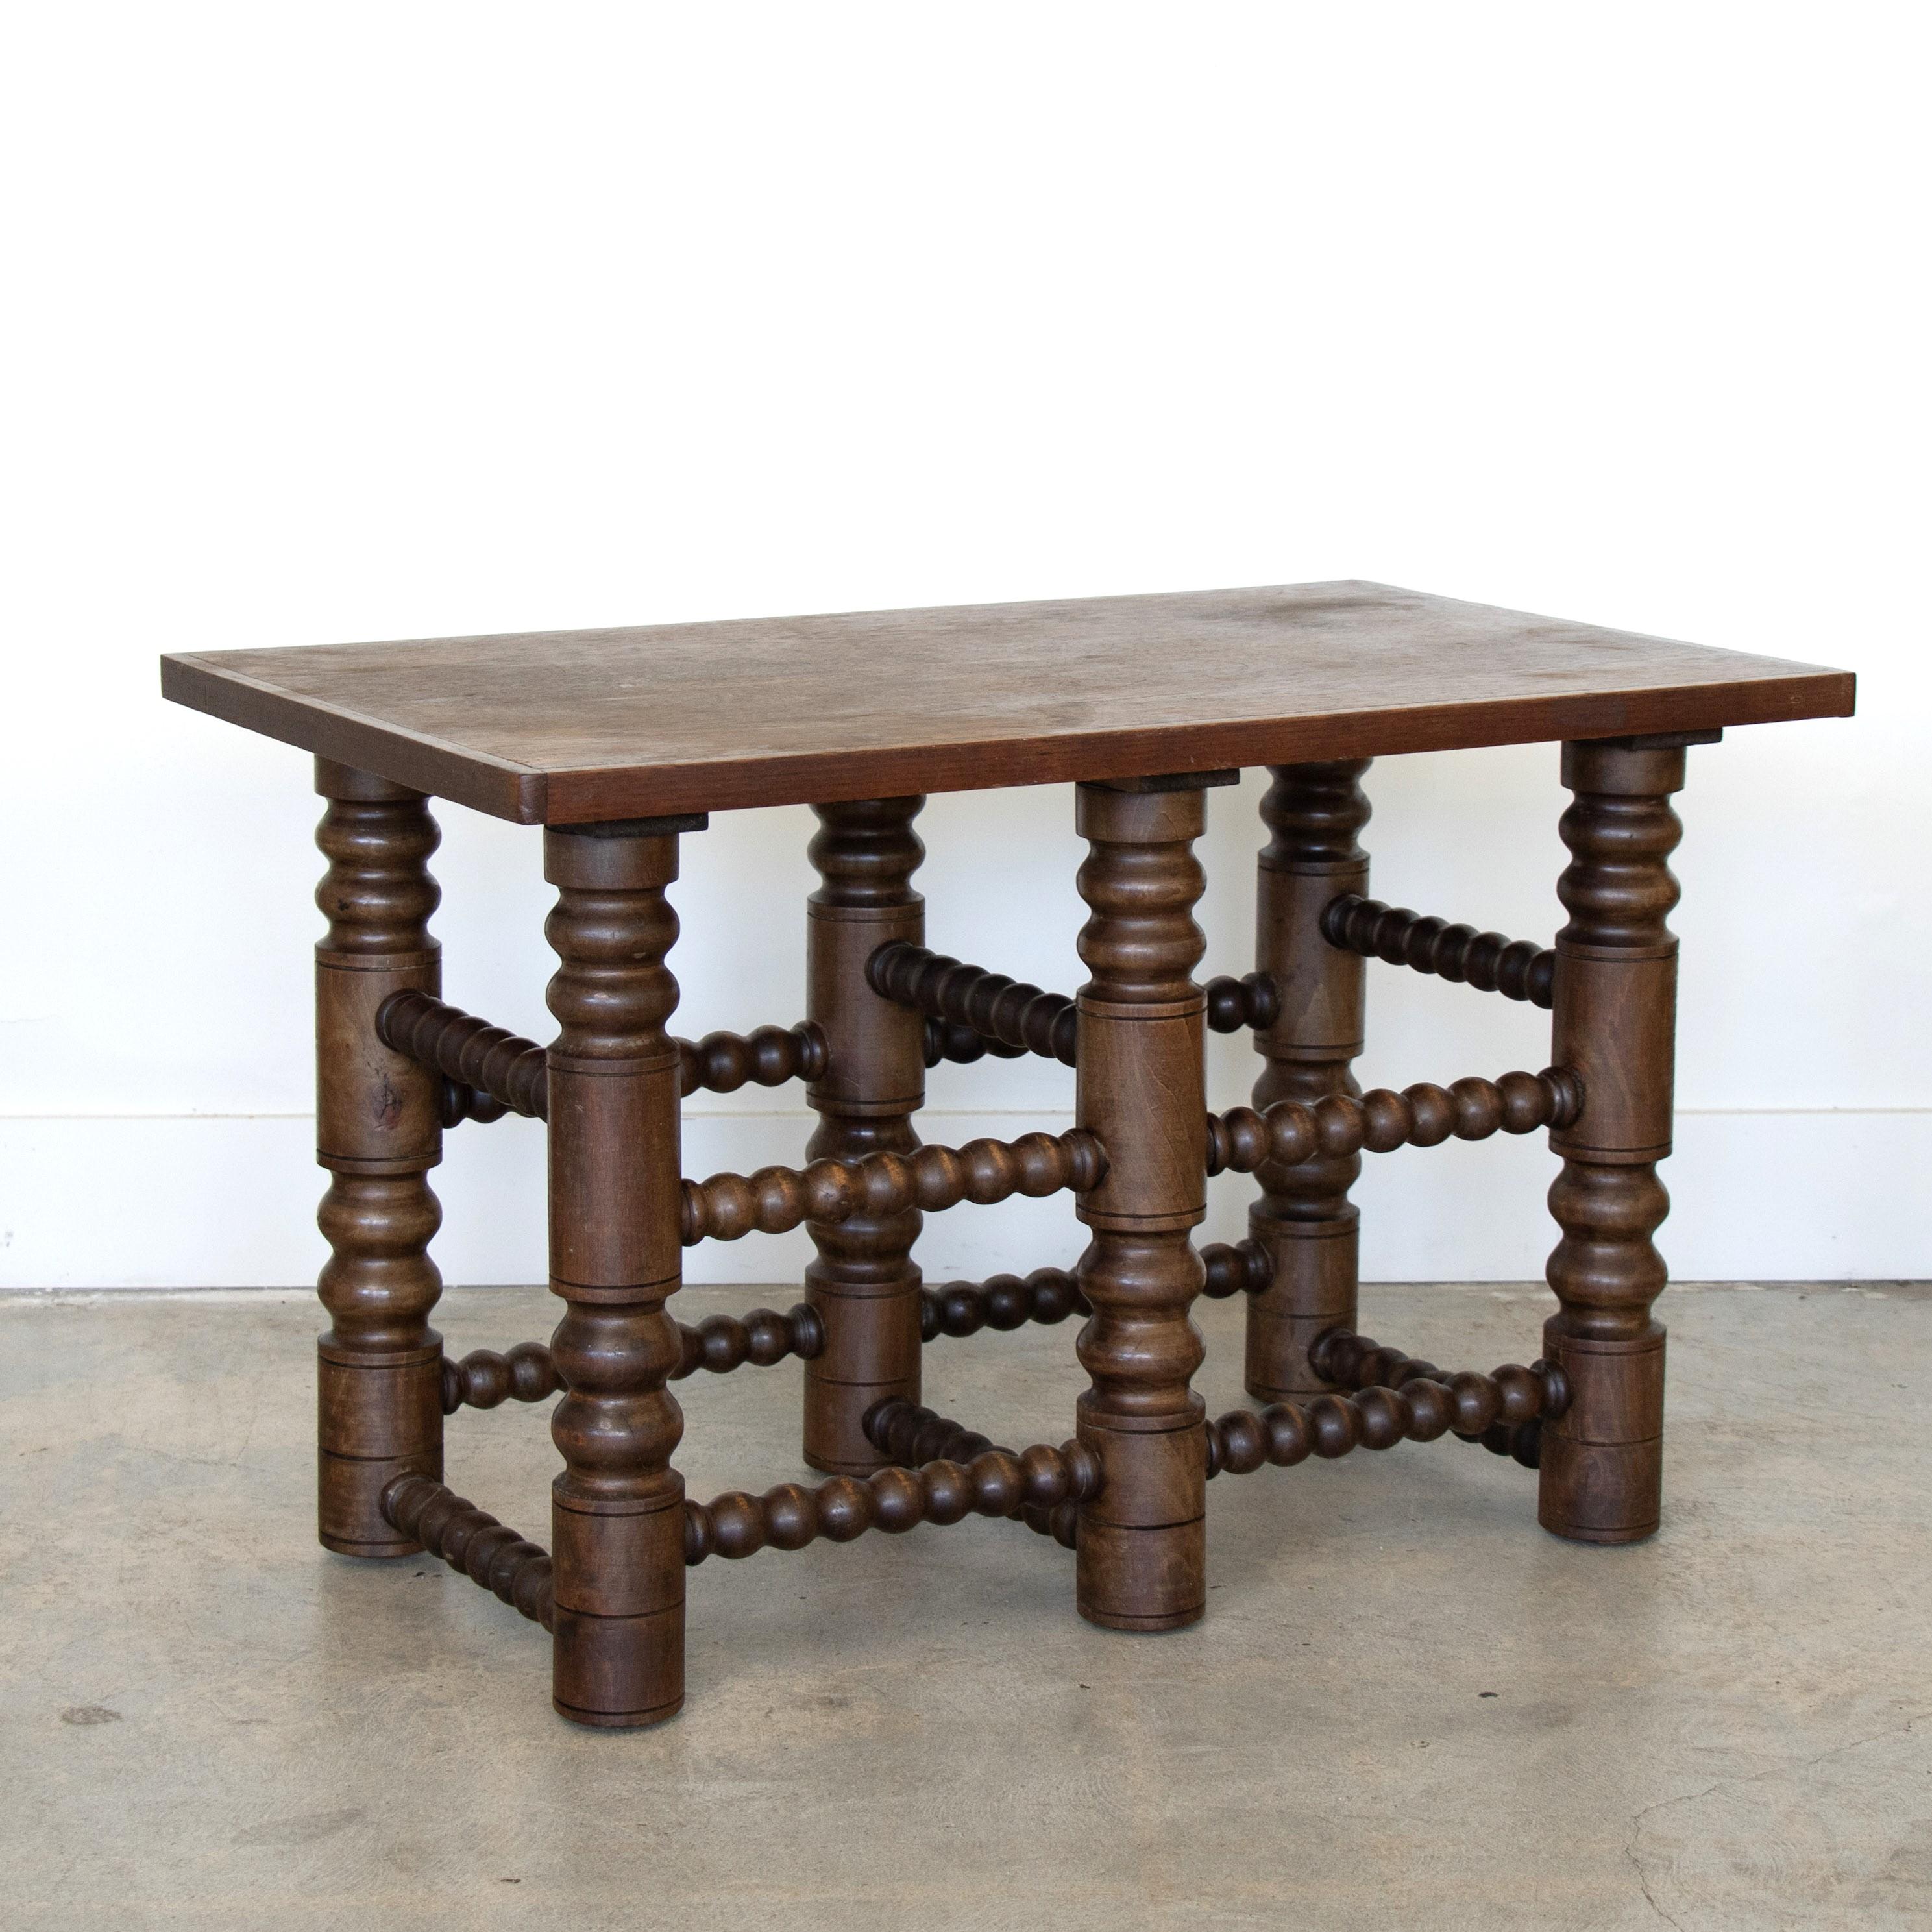 Incredible French dark oak wood coffee table in the style of Charles Dudouyt, 1940's. Rectangular top with intricately carved legs and crossbars. Perfect as a small coffee table or side table. Original wood finish shows great patina and age. 